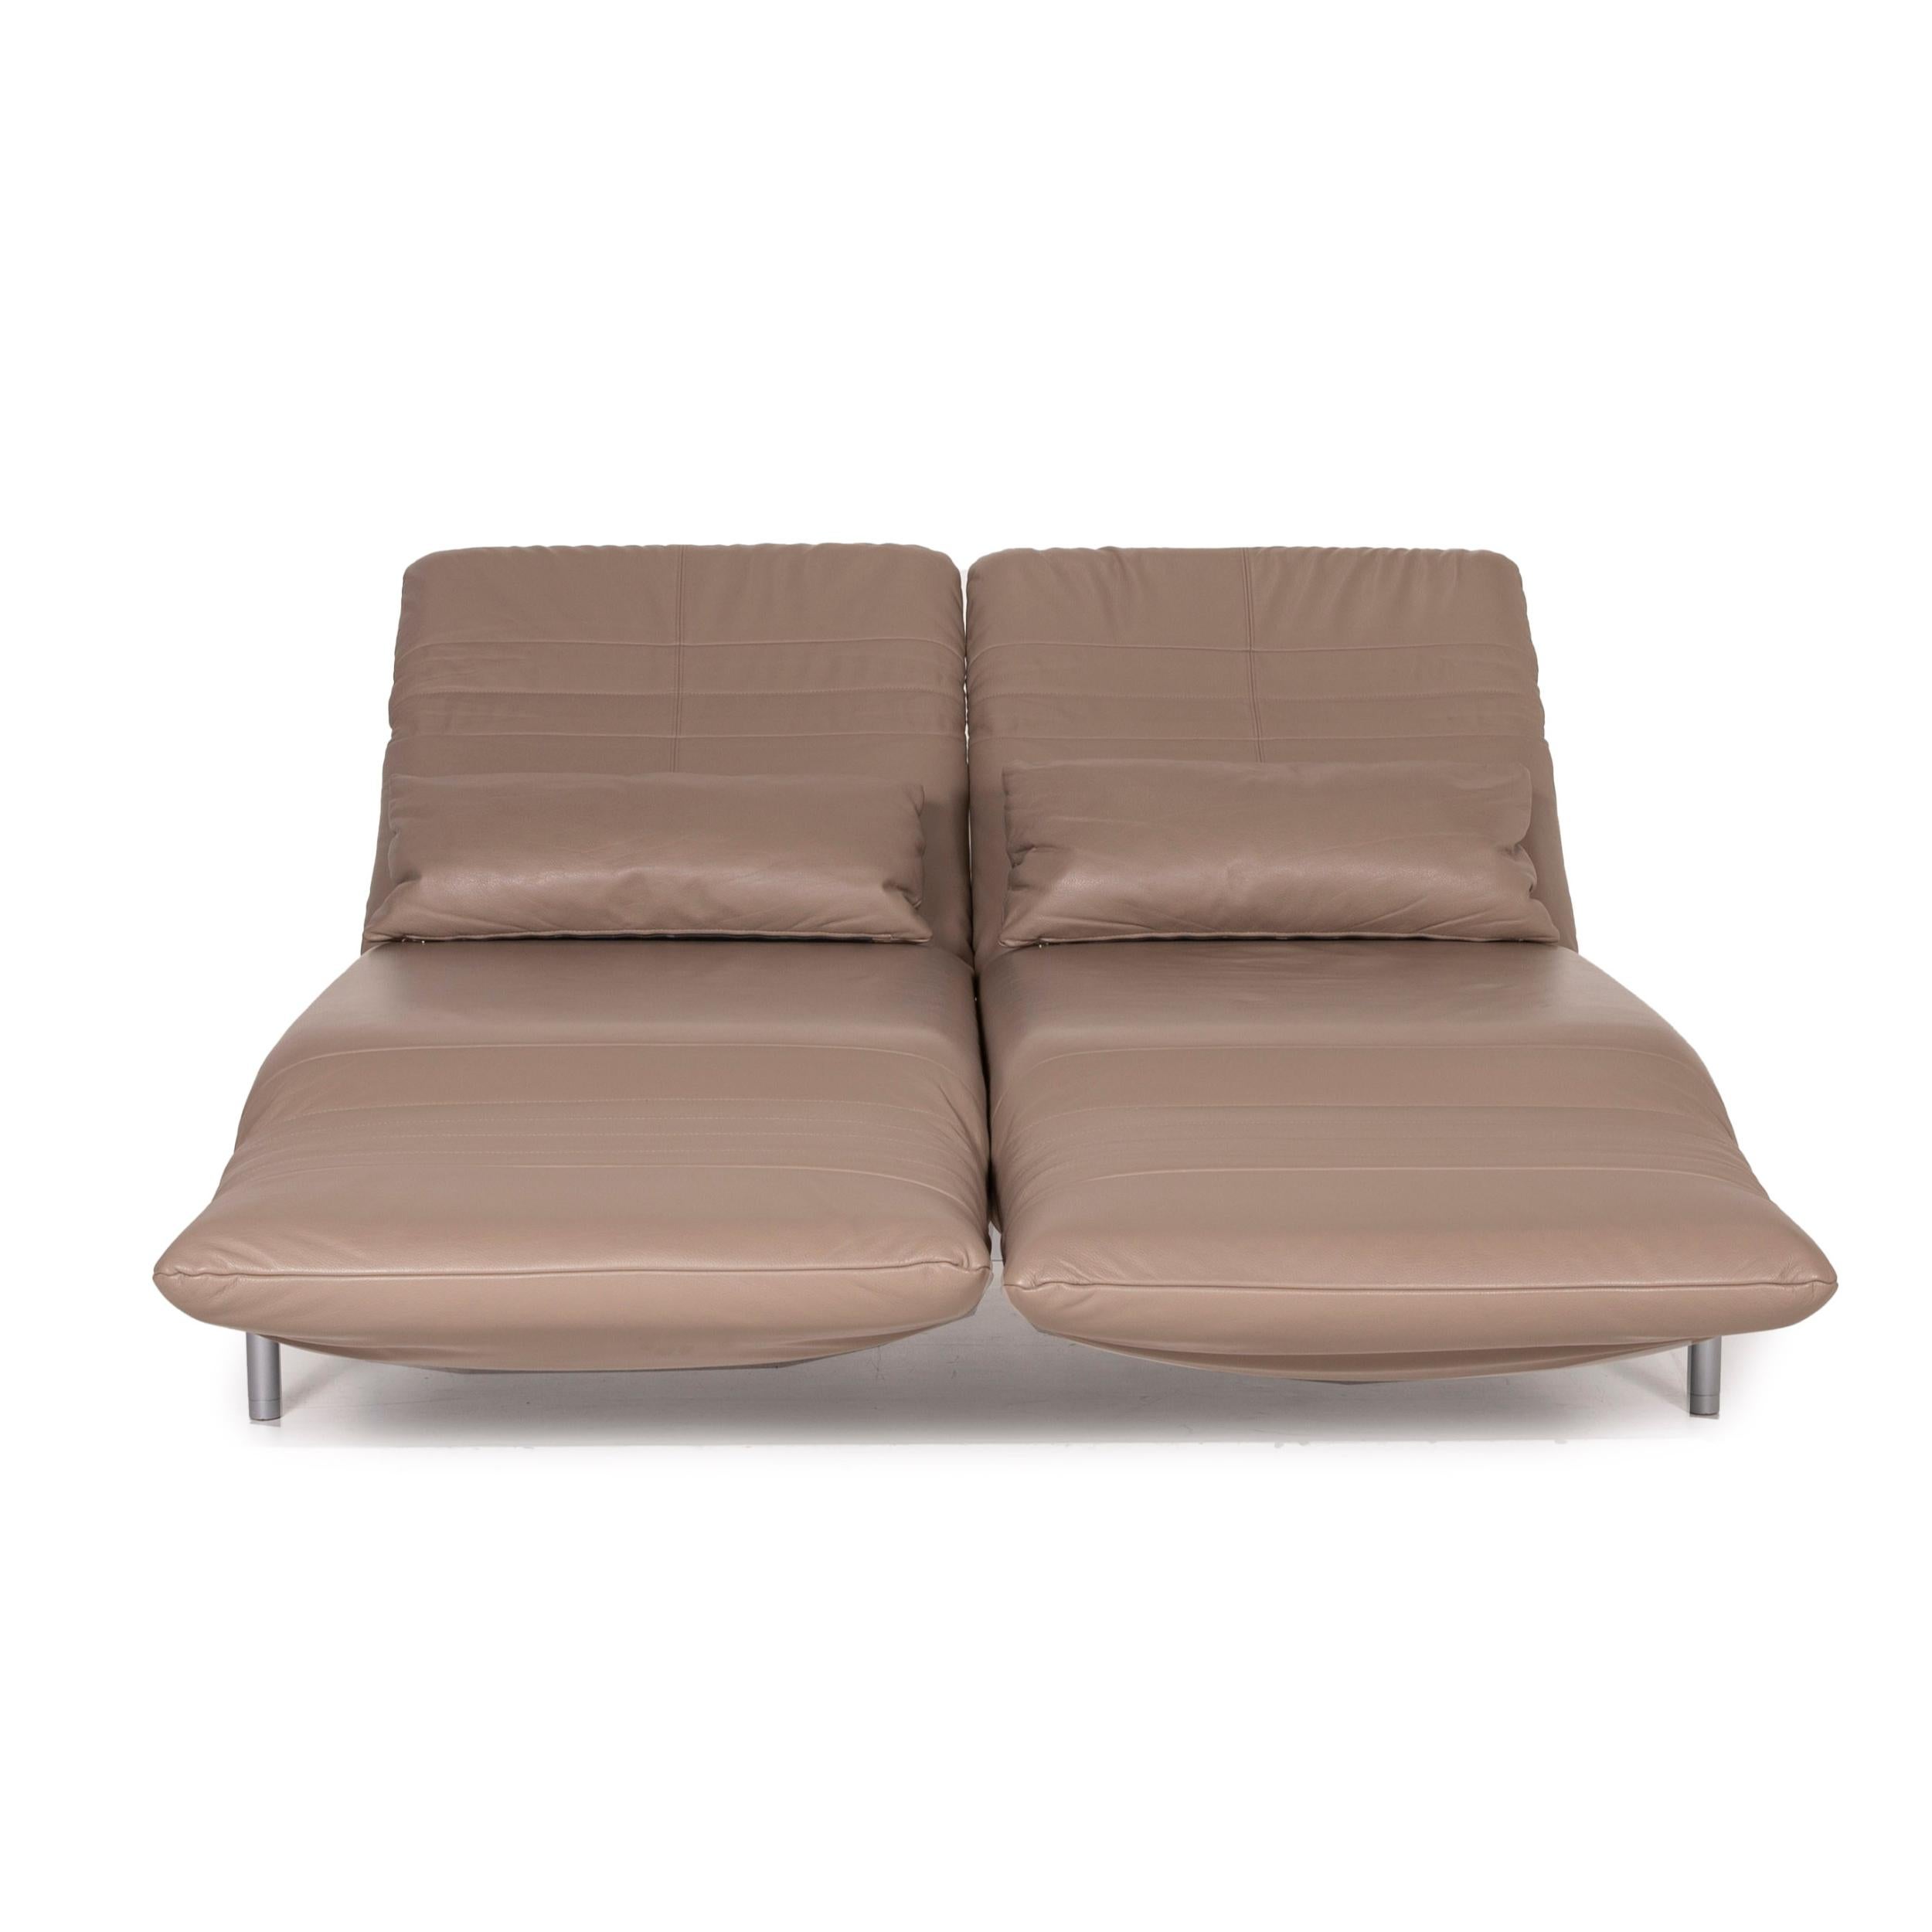 Modern Rolf Benz Plura Leather Sofa Brown Two-Seater Function Reclining Function